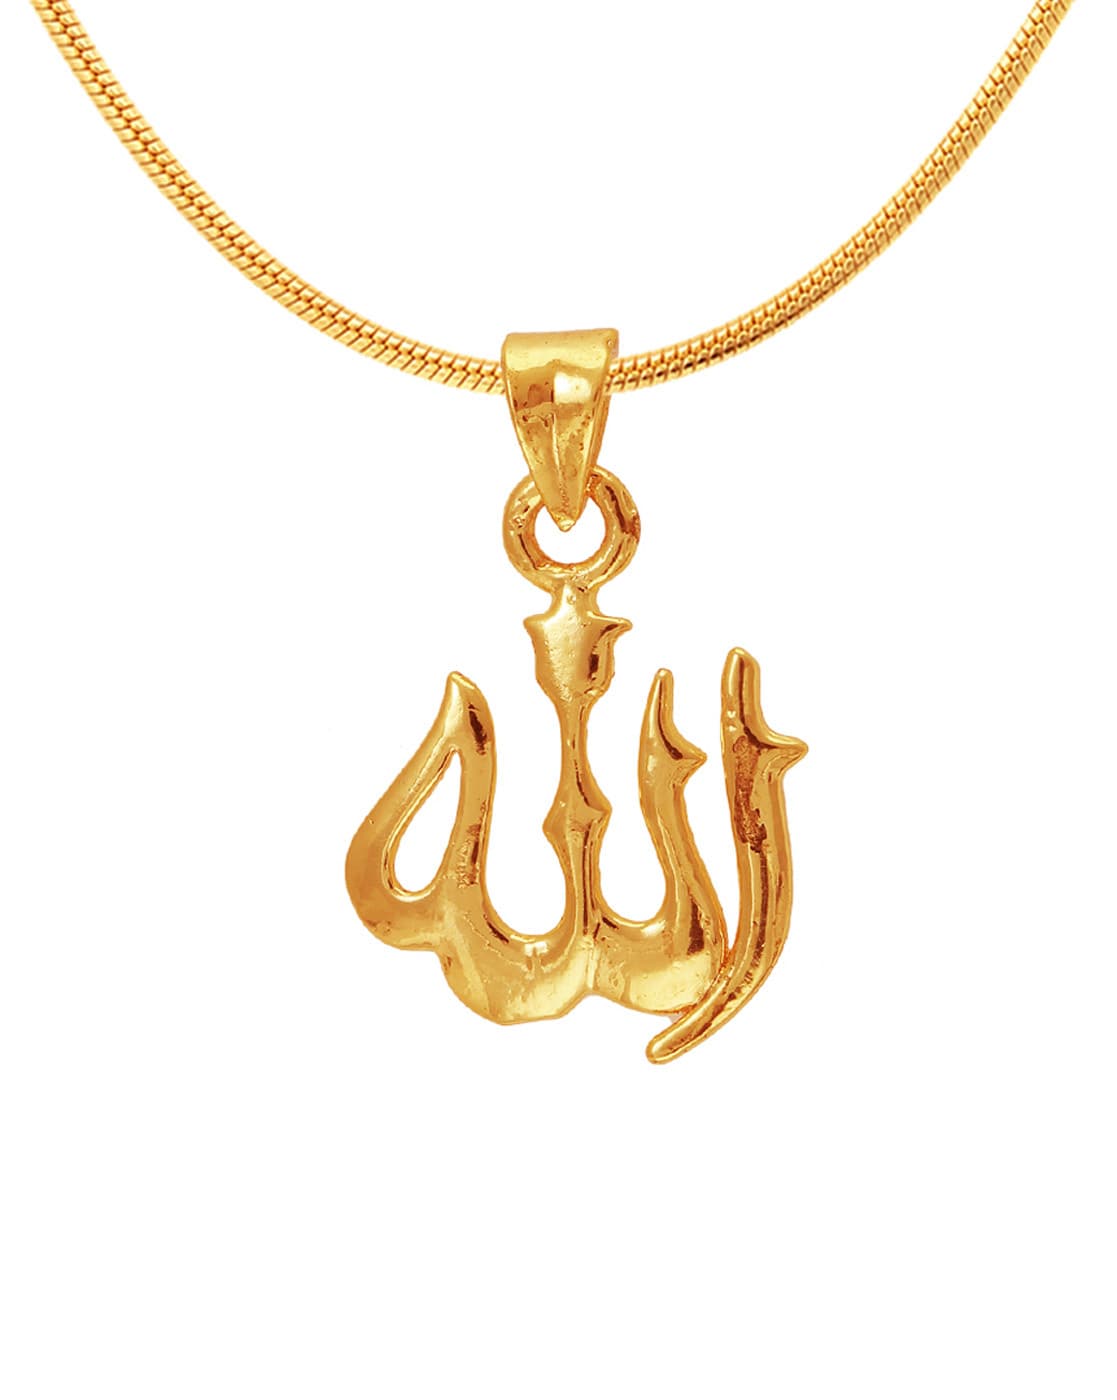 Allah gold necklace - Noush Jewelry